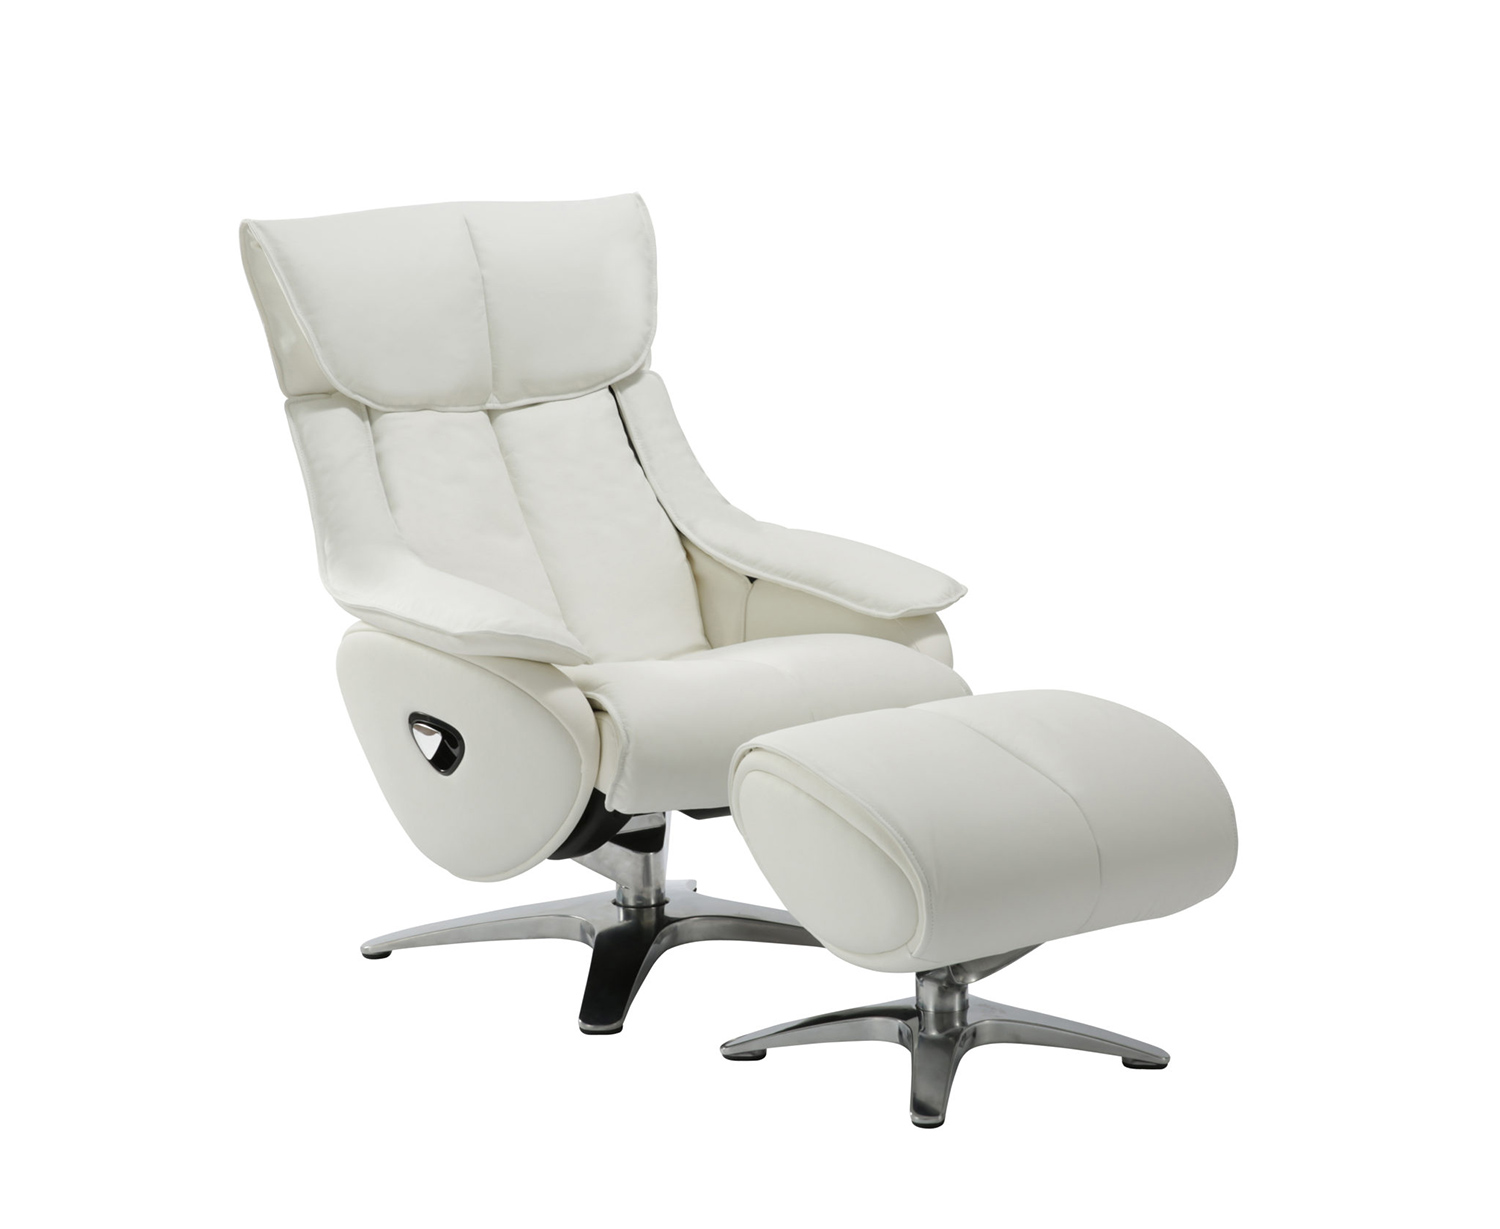 Barcalounger Eton Pedestal Recliner Chair with Adjustable Head Rest and Adjustable Ottoman - Capri White/leather match